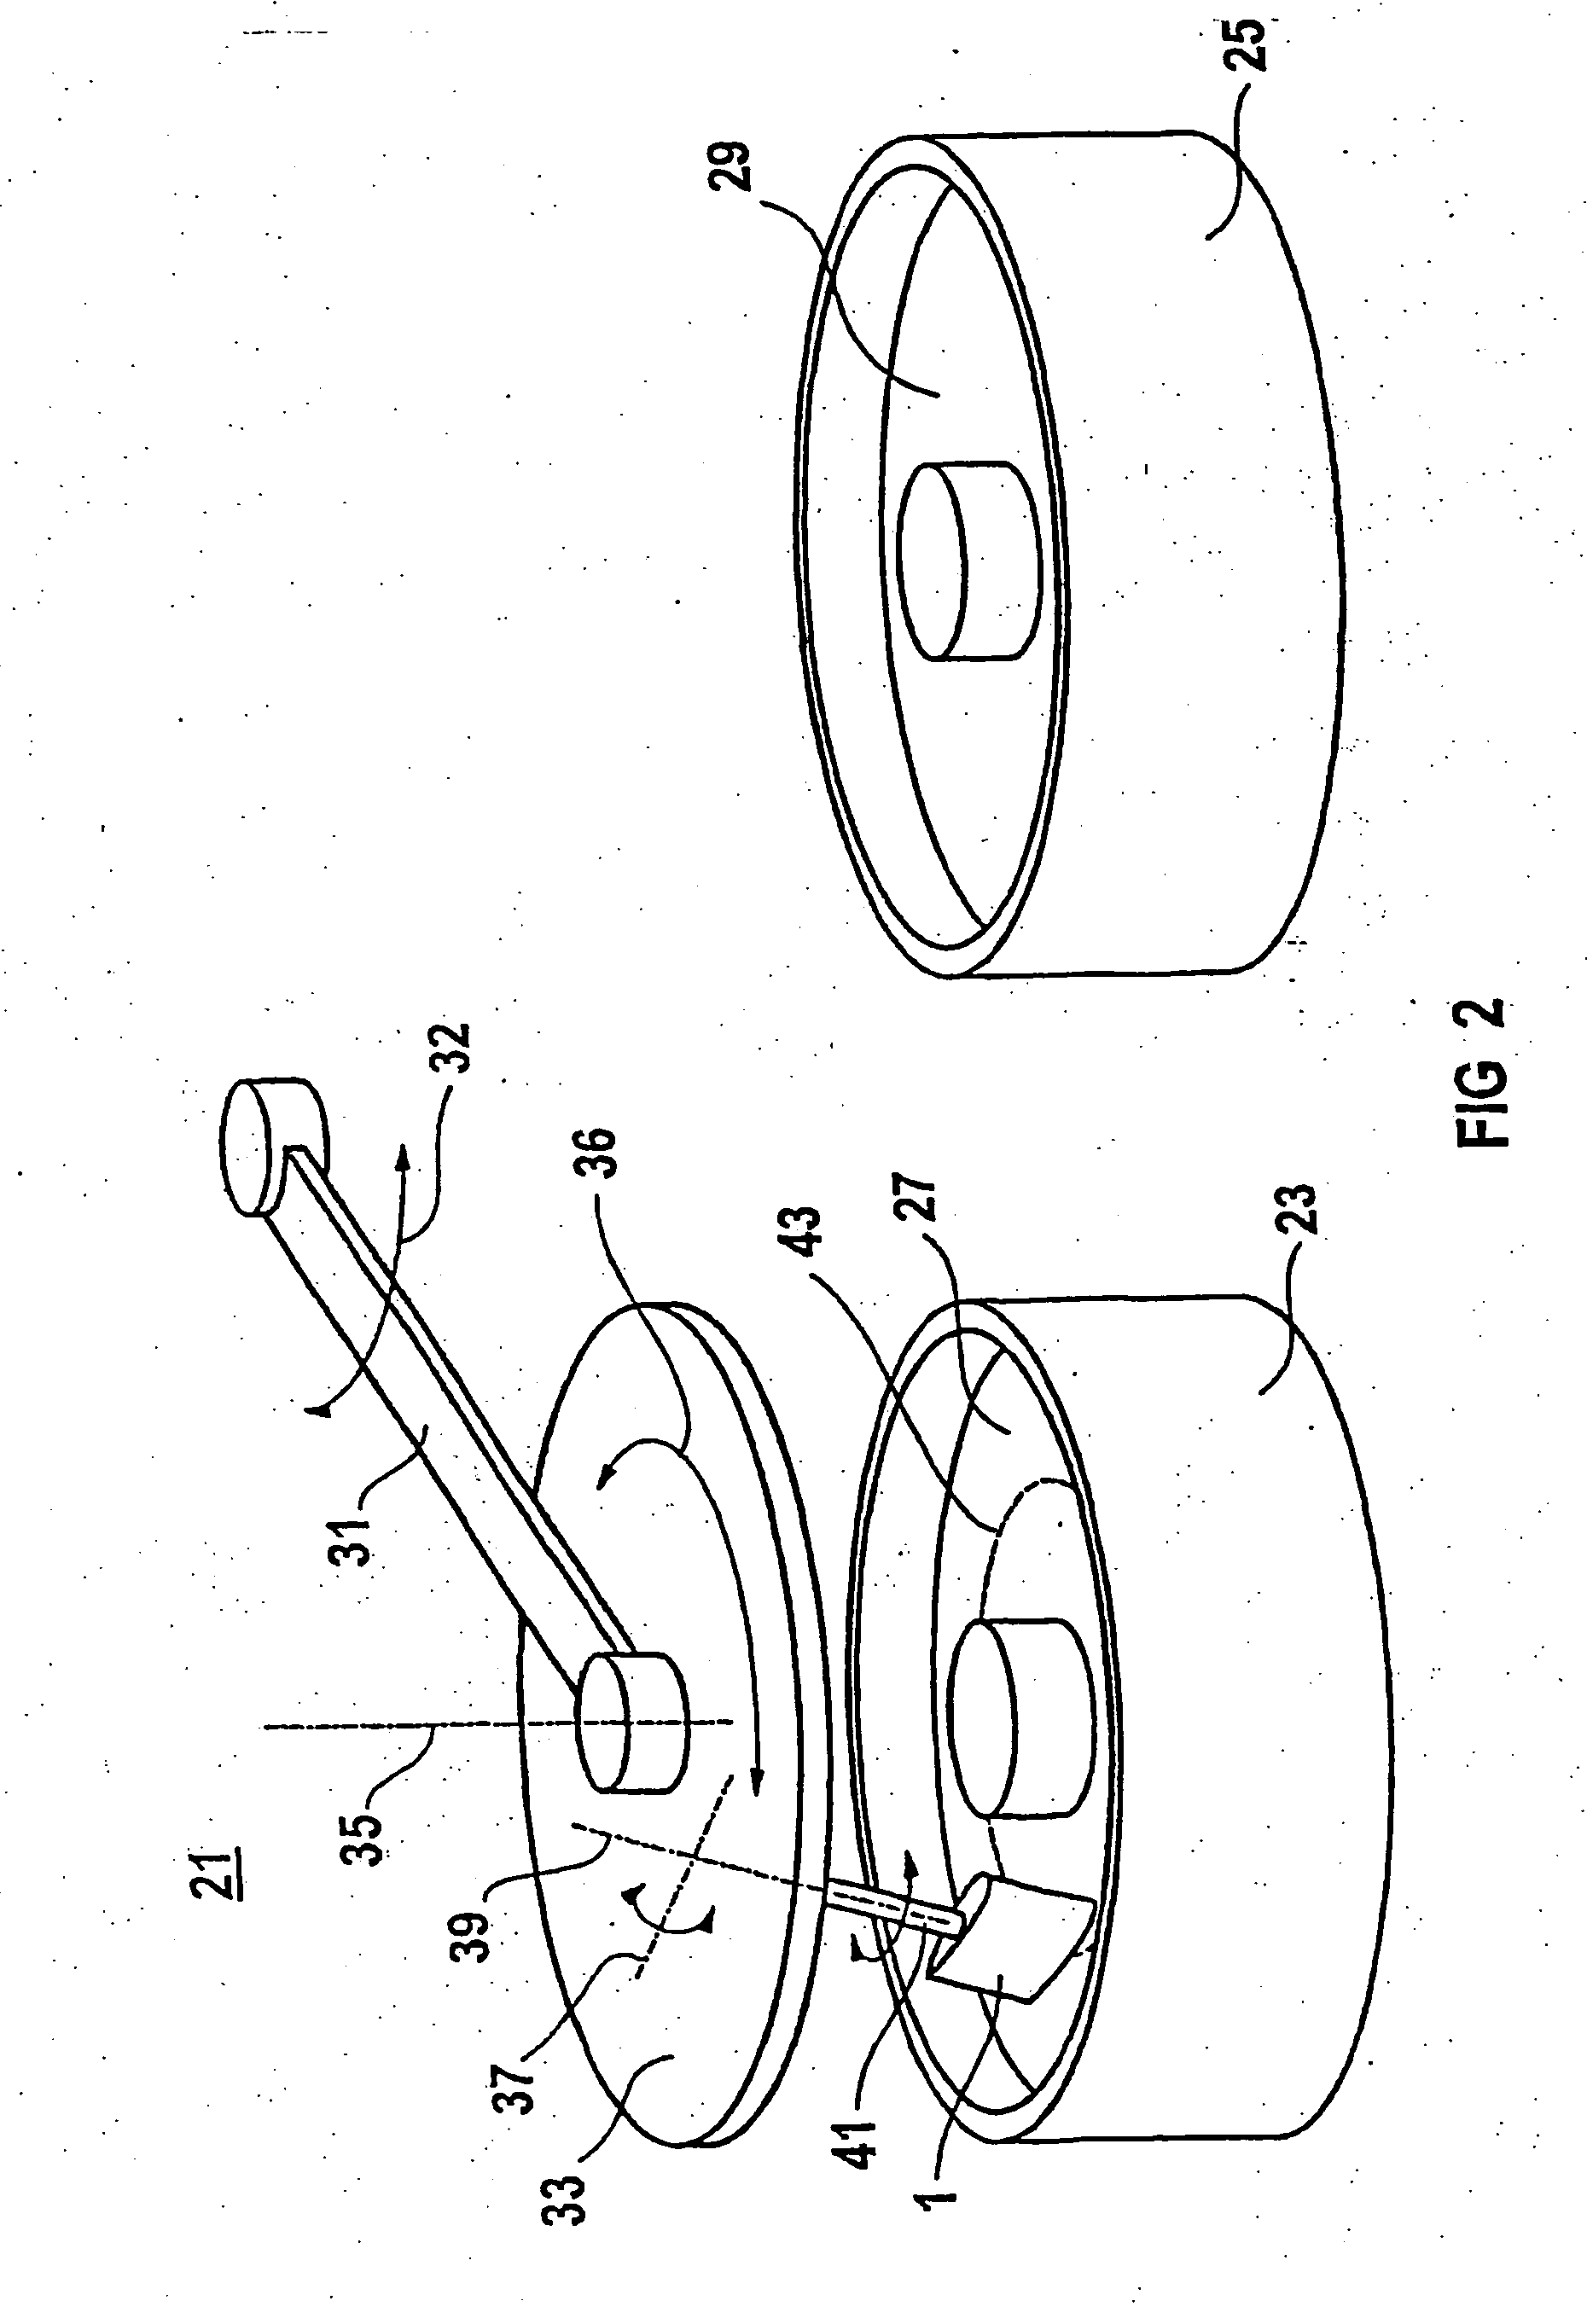 Apparatus for smoothing the surface of a gas turbine blade